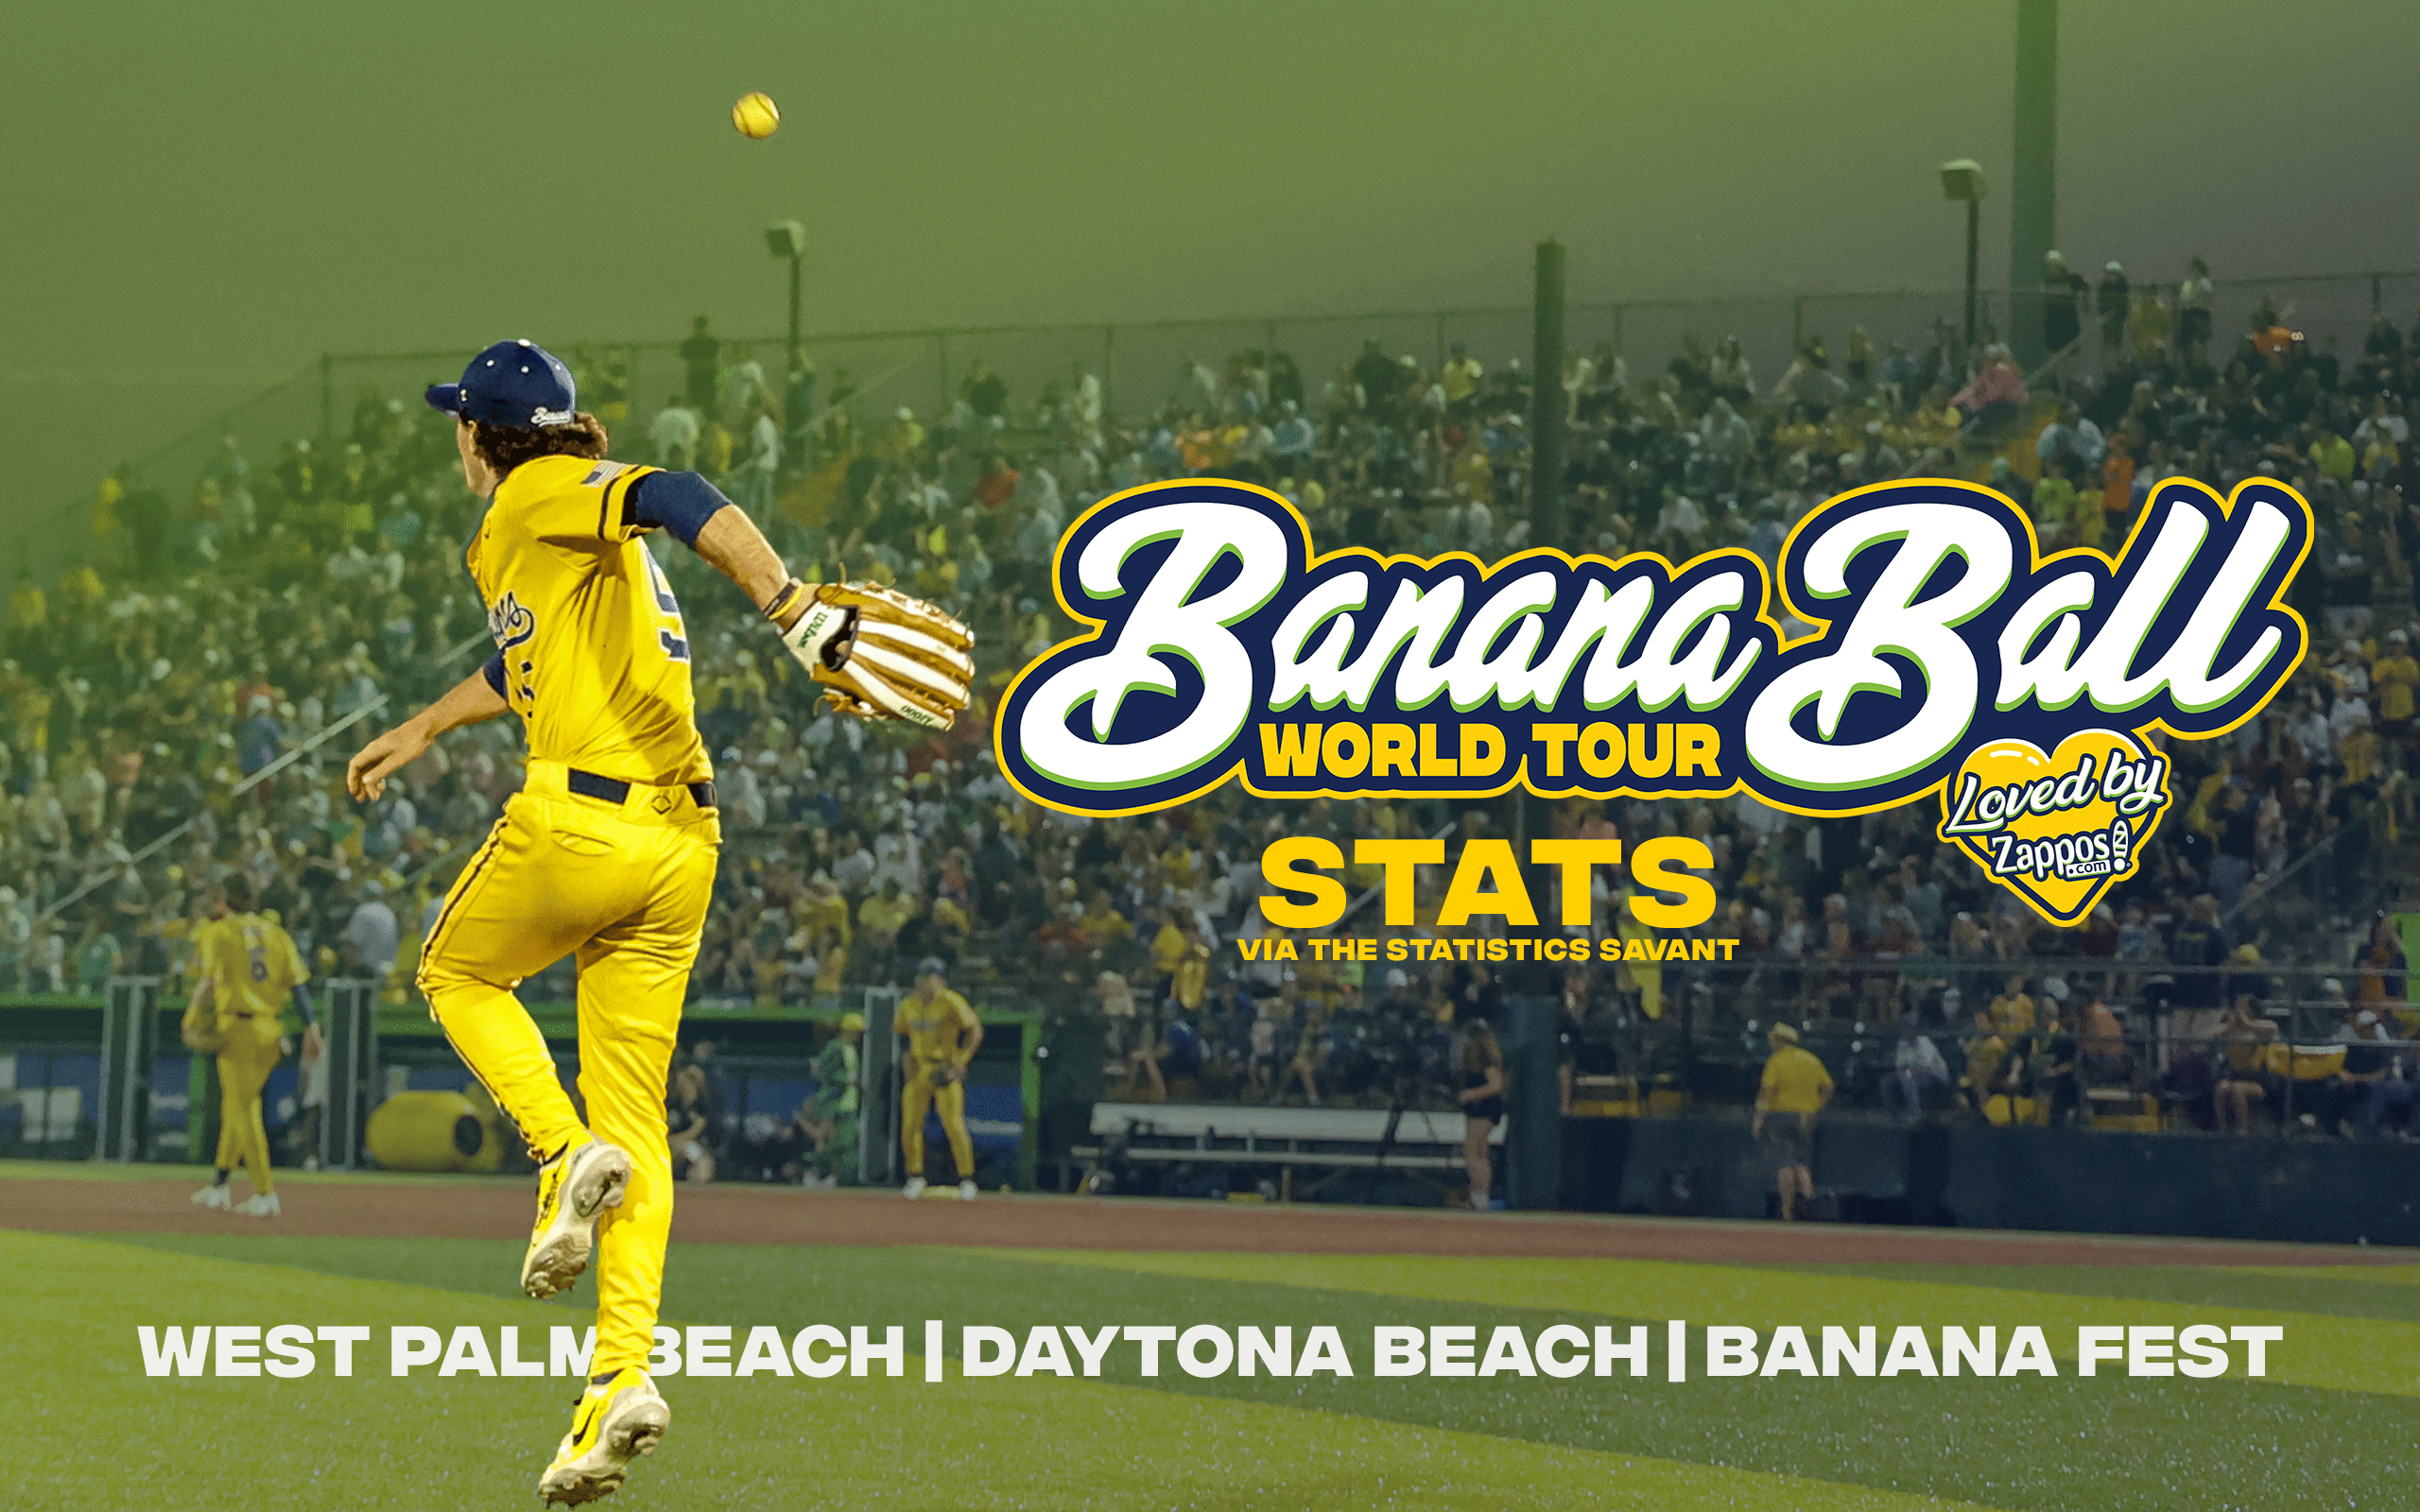 The Wildest Stats from the First Leg of the 2023 Banana Ball World Tour